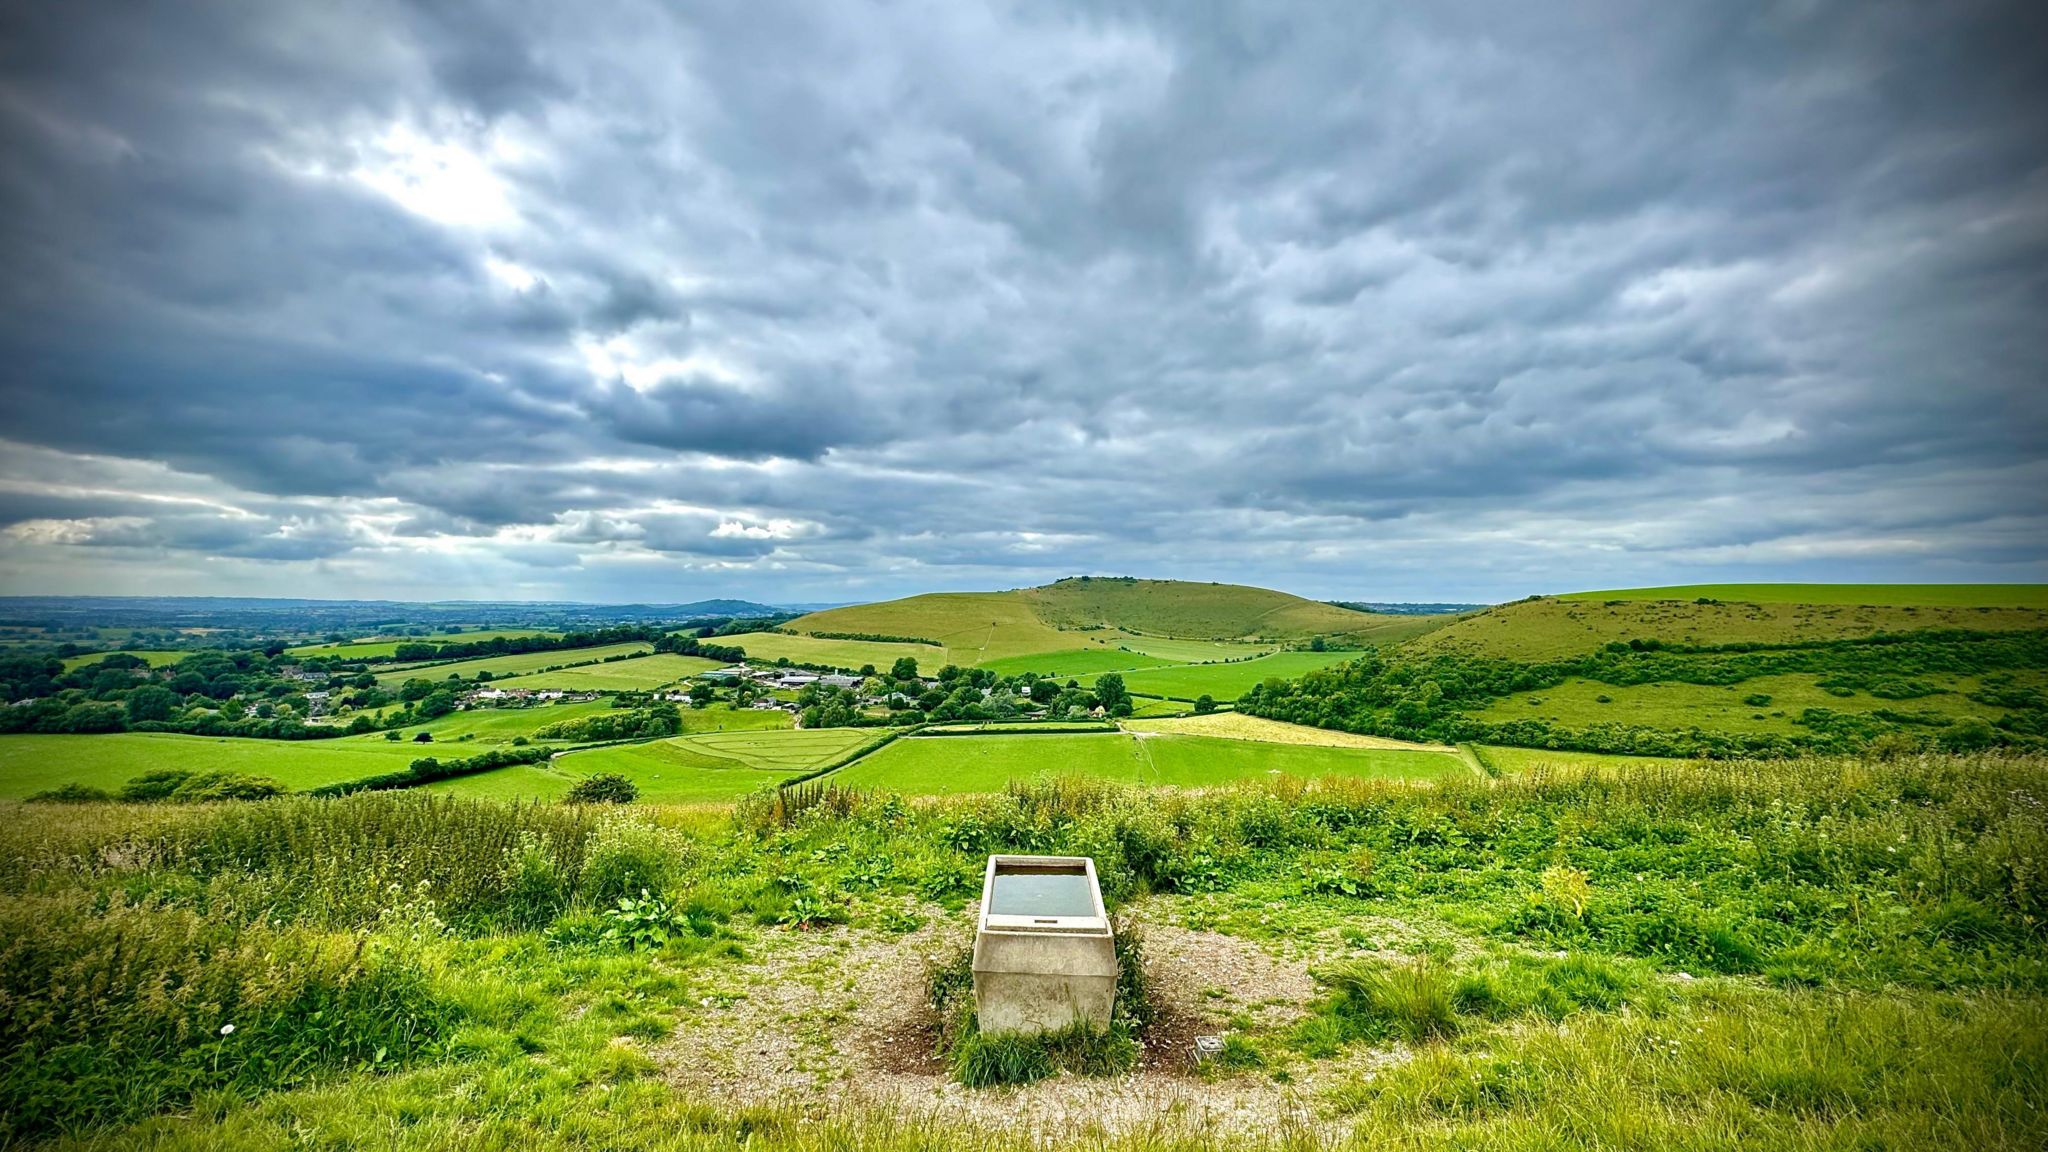 THURSDAY - The rolling green Dorset countryside is photographed from Compton Abbas. A metal water trough is in the centre of the frame, behind the countryside is dotted with trees and hedges with two hills. The sky is covered in grey clouds